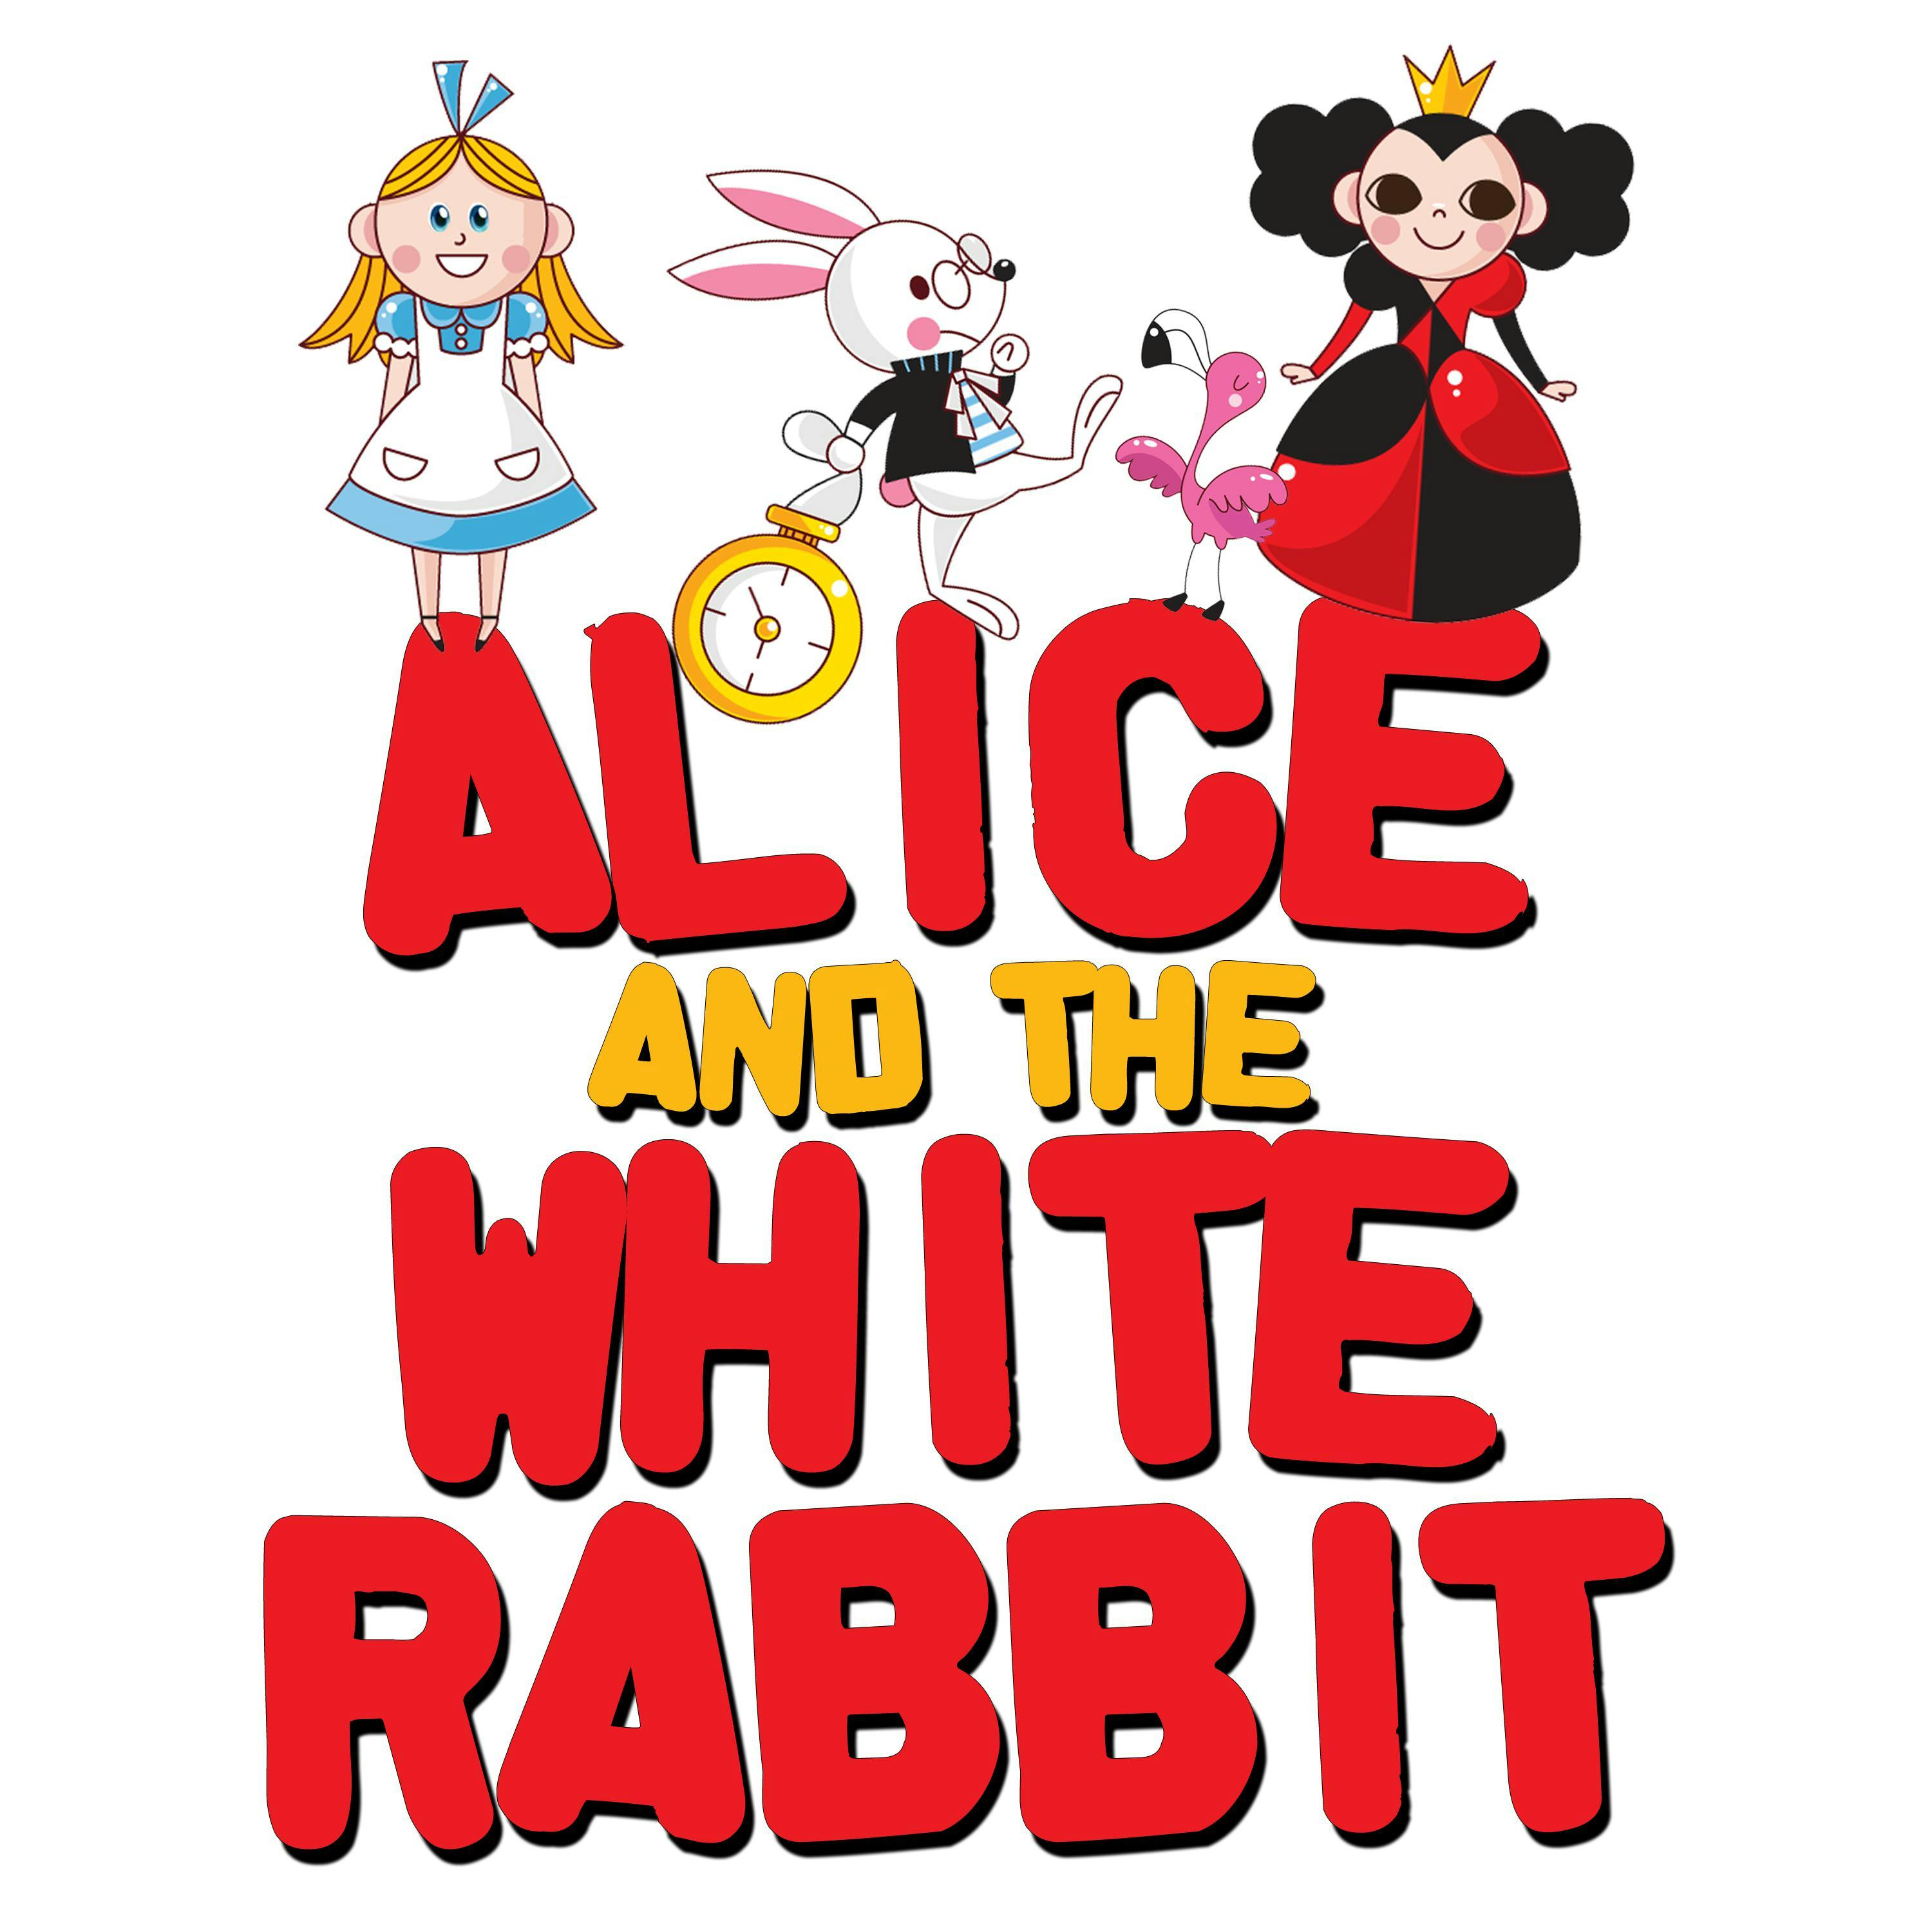 Alice and the White Rabbit - Roger Wade, Lewis Carroll, Traditional